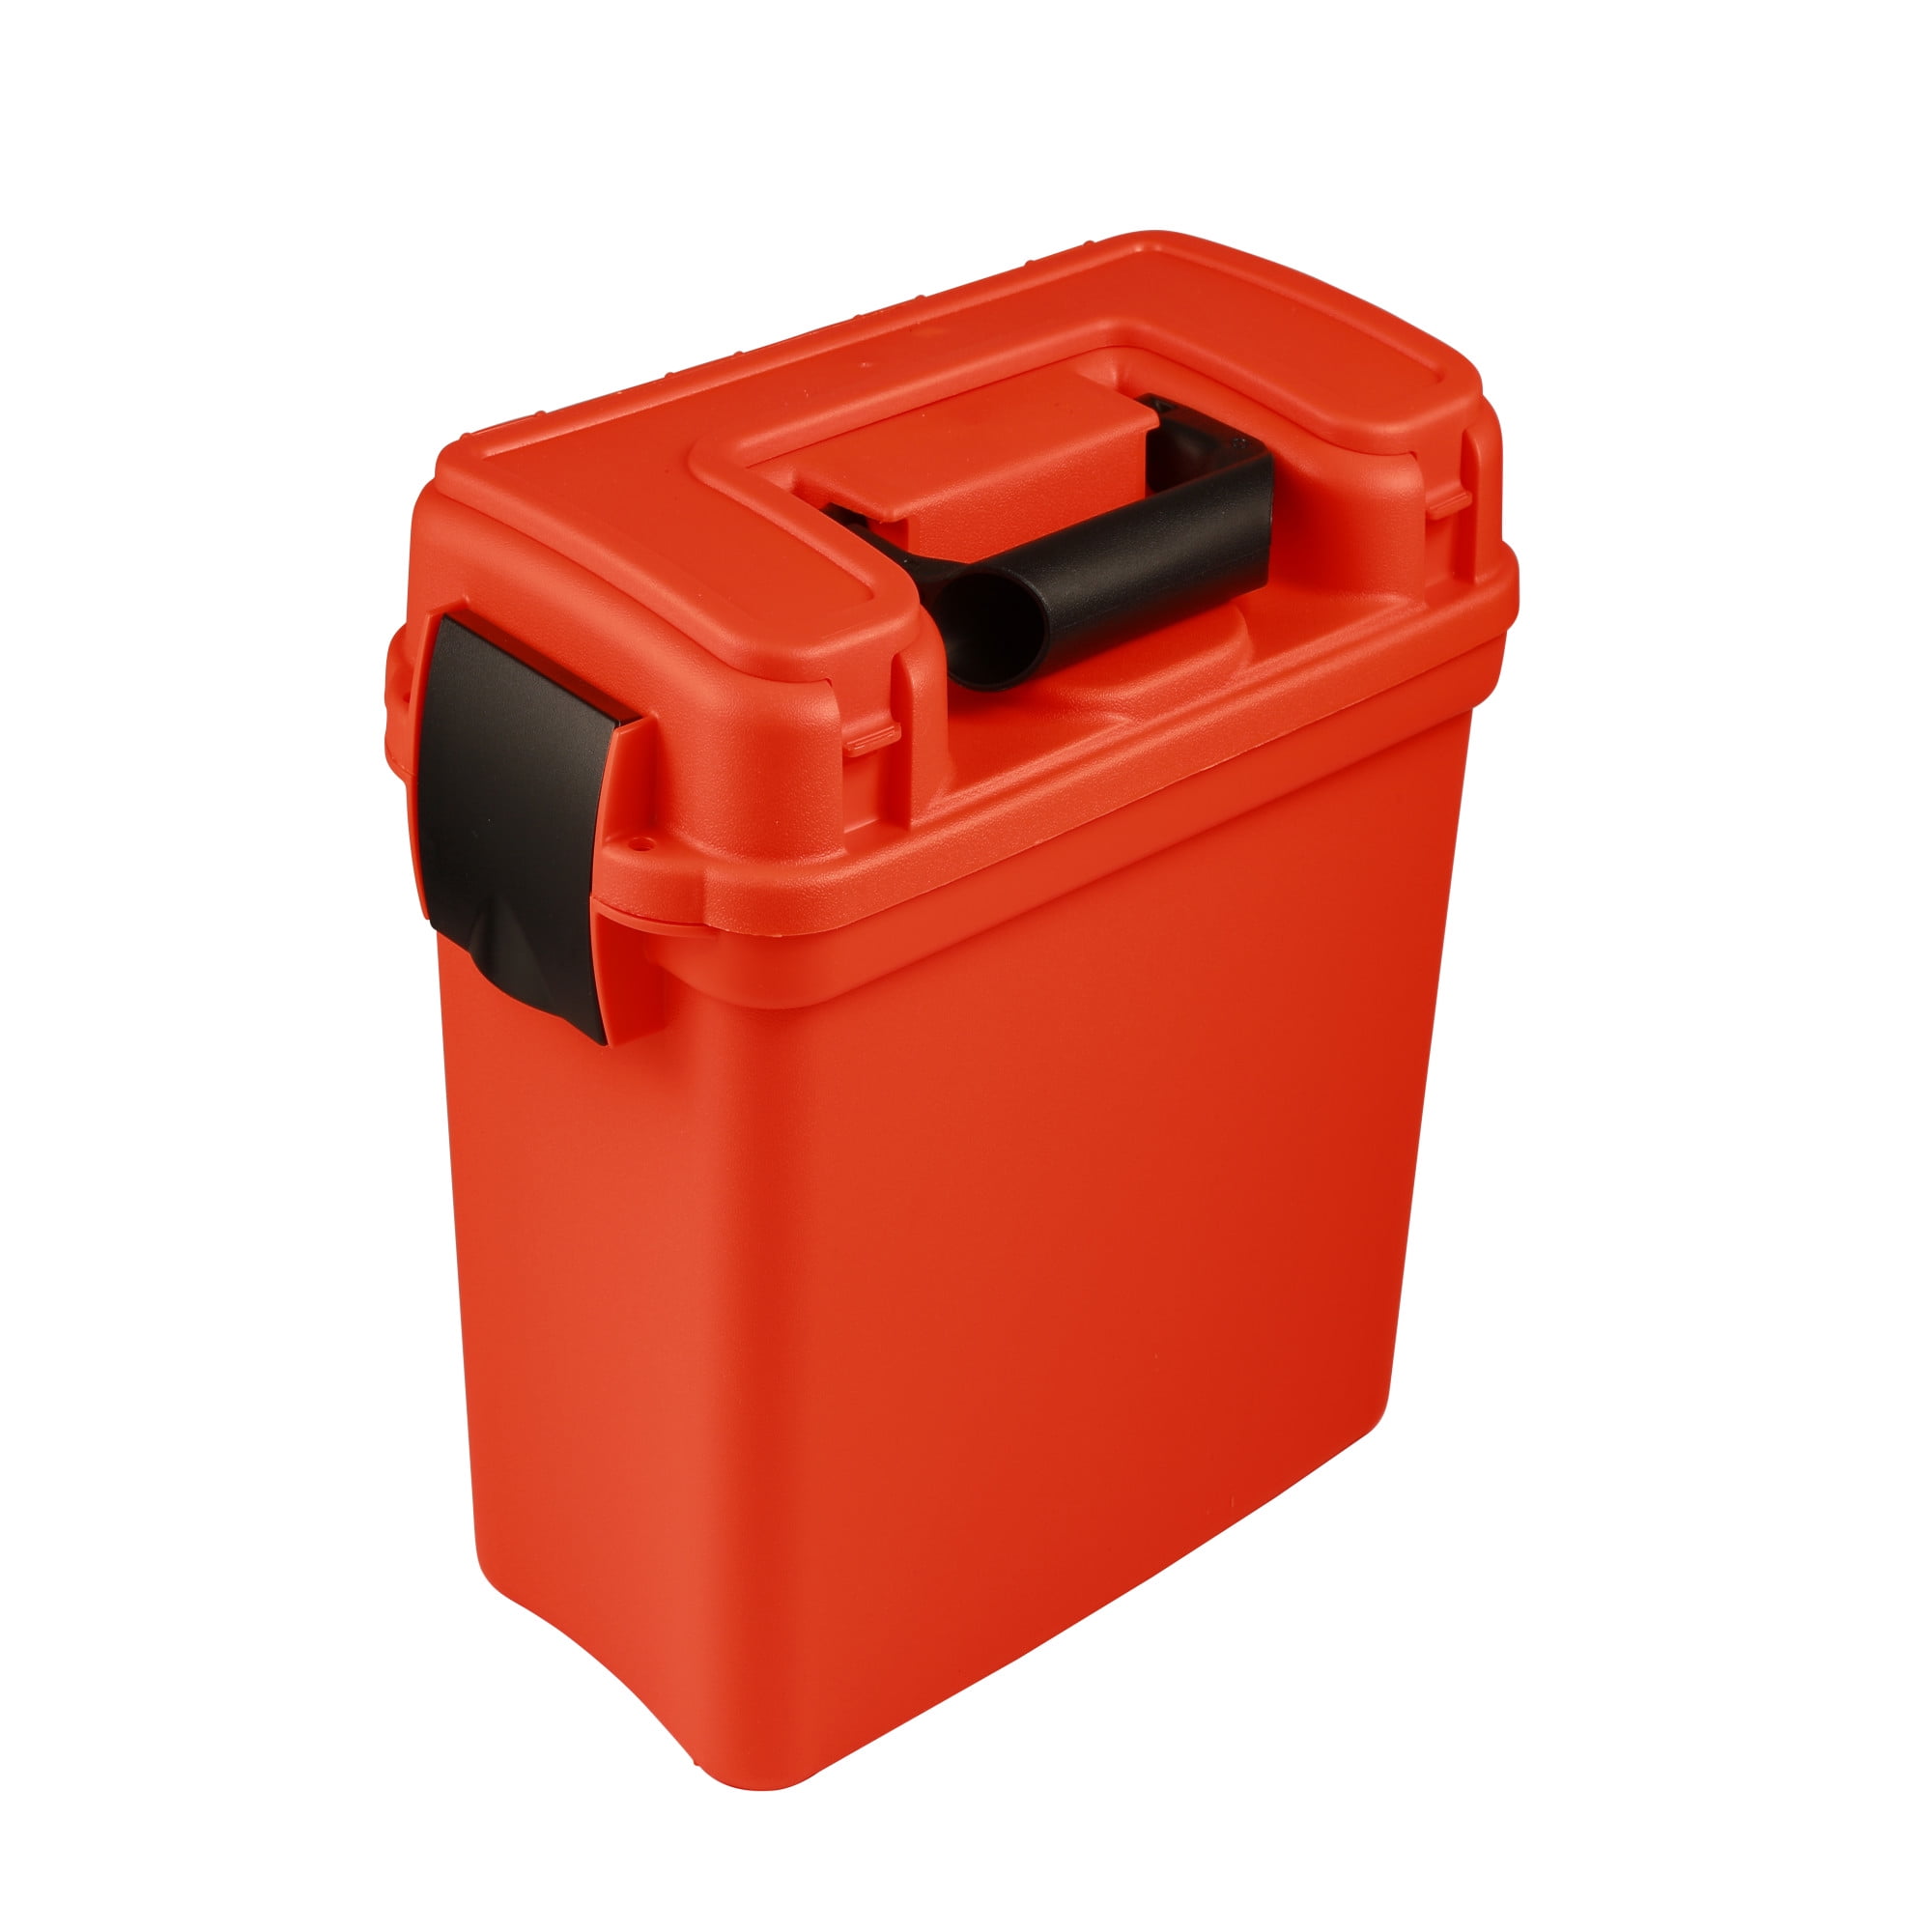 Dry Box Waterproof Storage with O-Ring Orange Floating Container Case w/ Padding 